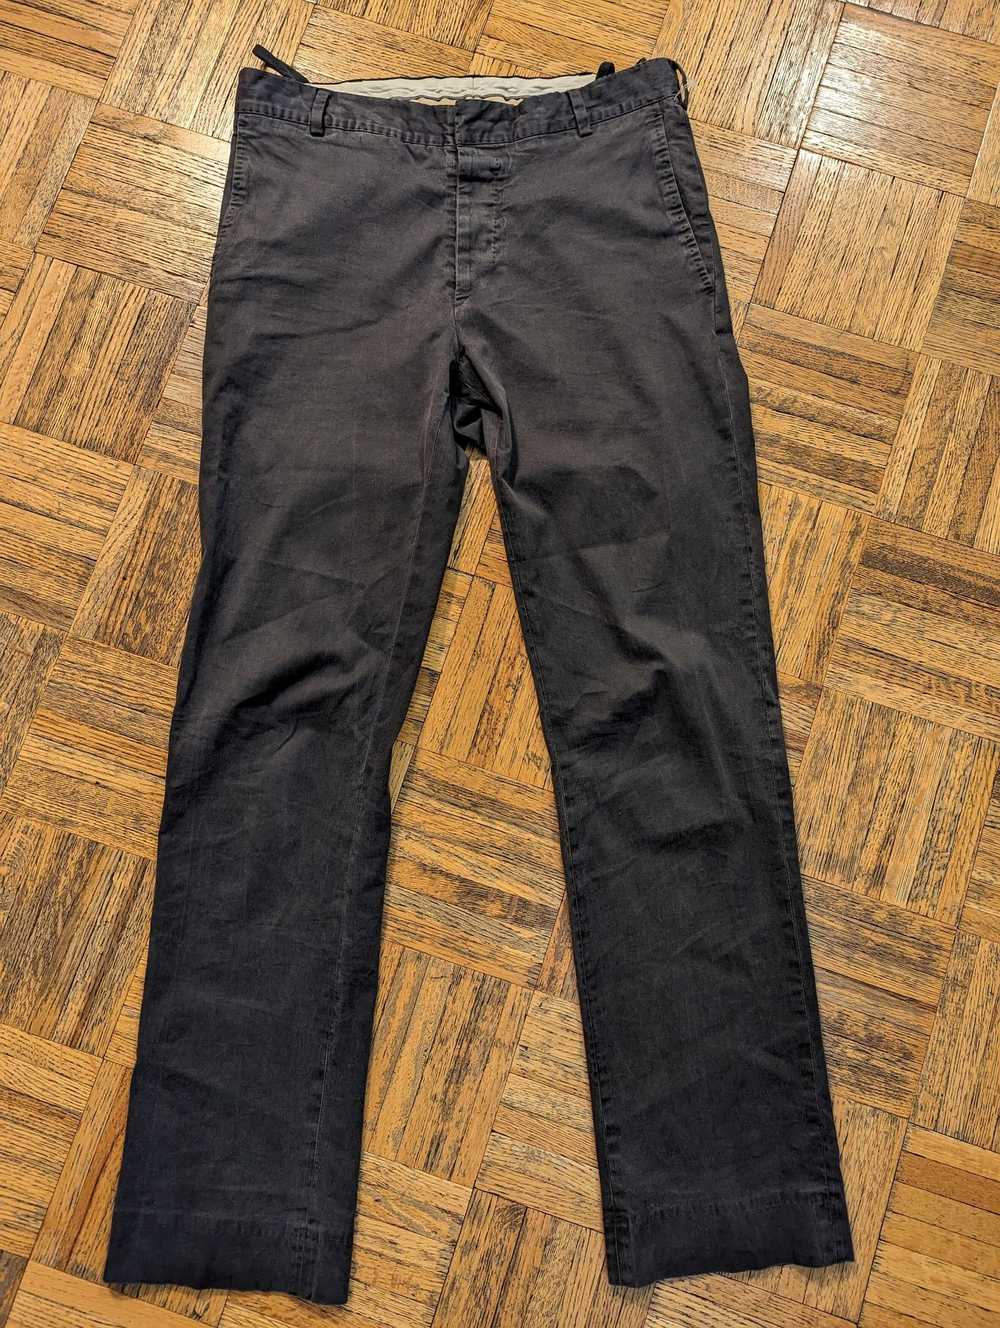 Helmut Lang Pants, made in Italy - image 1